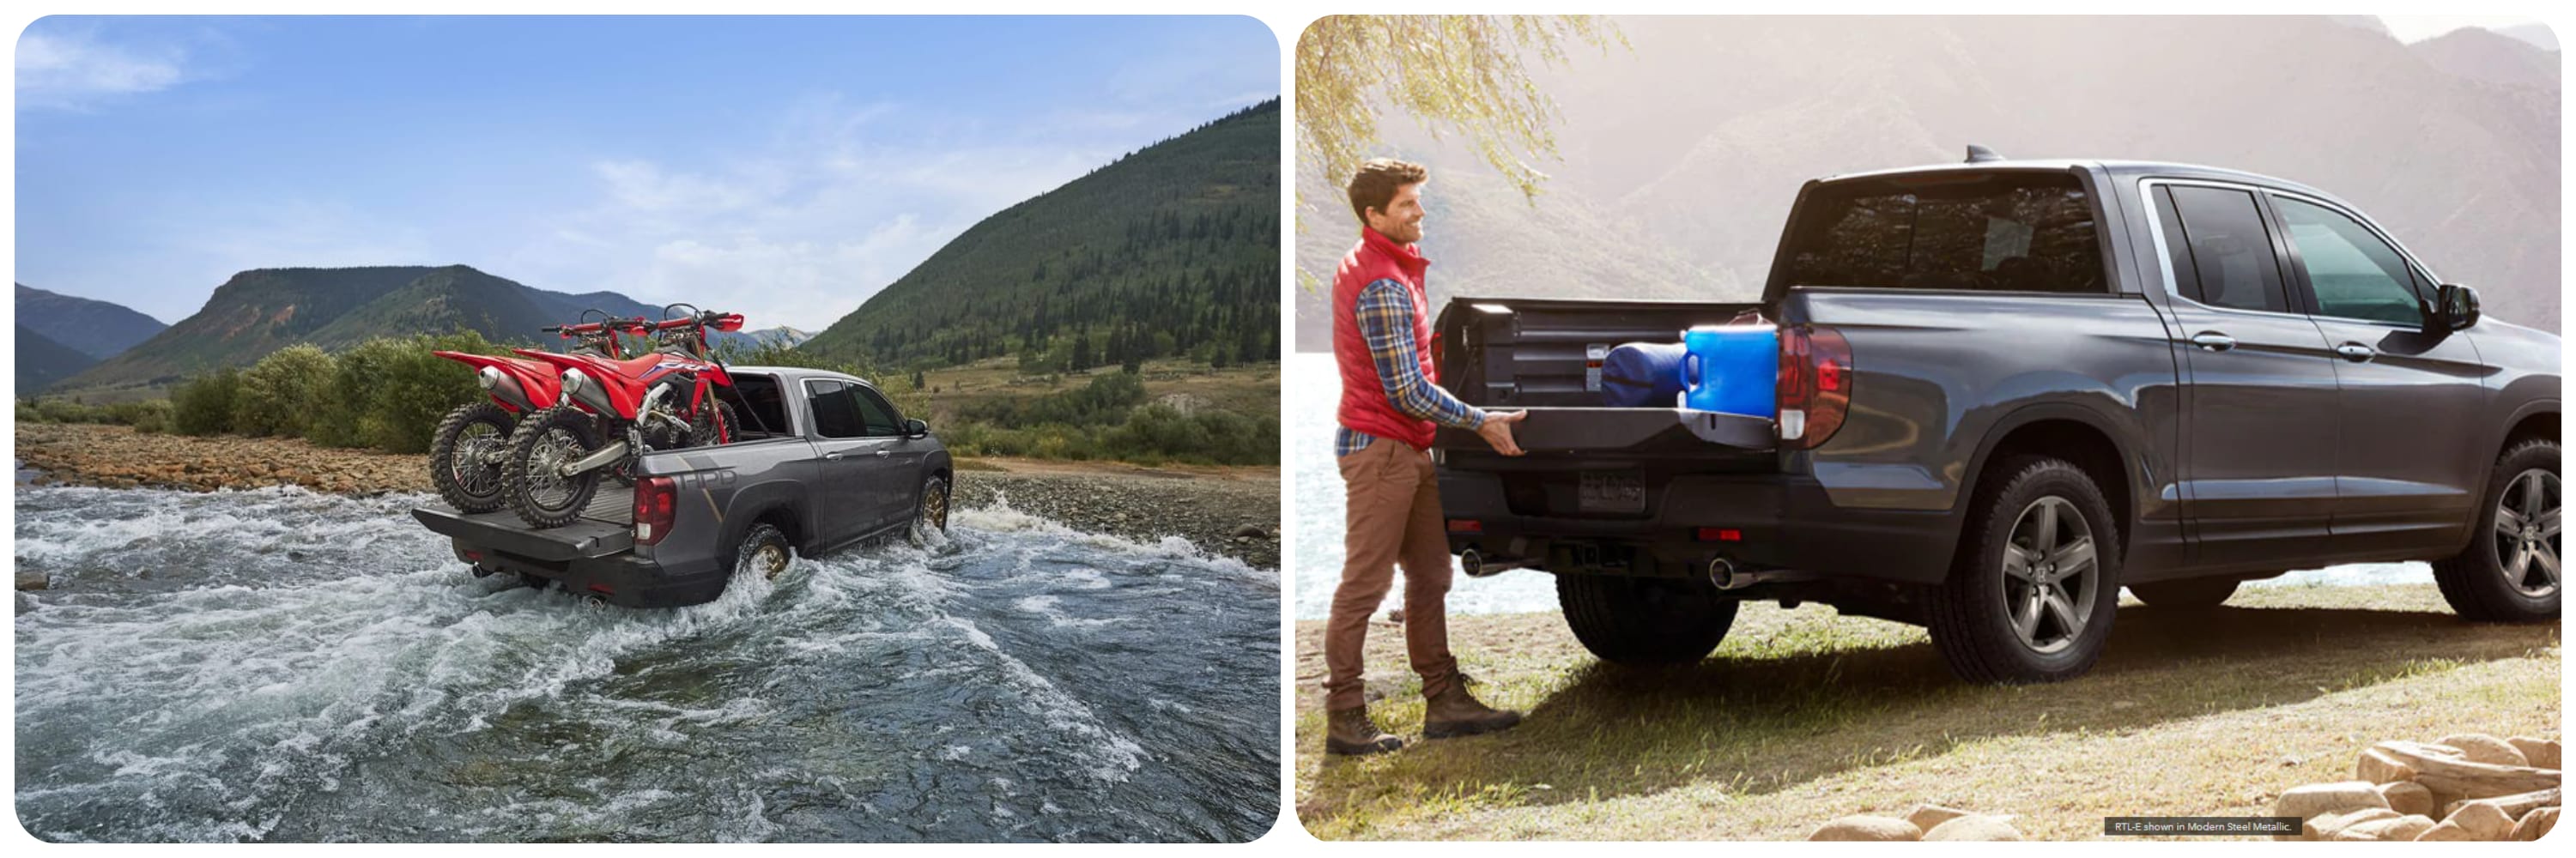 On the left a view of a dark gray 2021 Honda Ridgeline as it drives away from the viewer with dirt bikes in the bed of the truck and it drives through water. On the right, a dark gray 2022 Honda Ridgeline is being loaded with gear by a man who is putting up the tailgate.